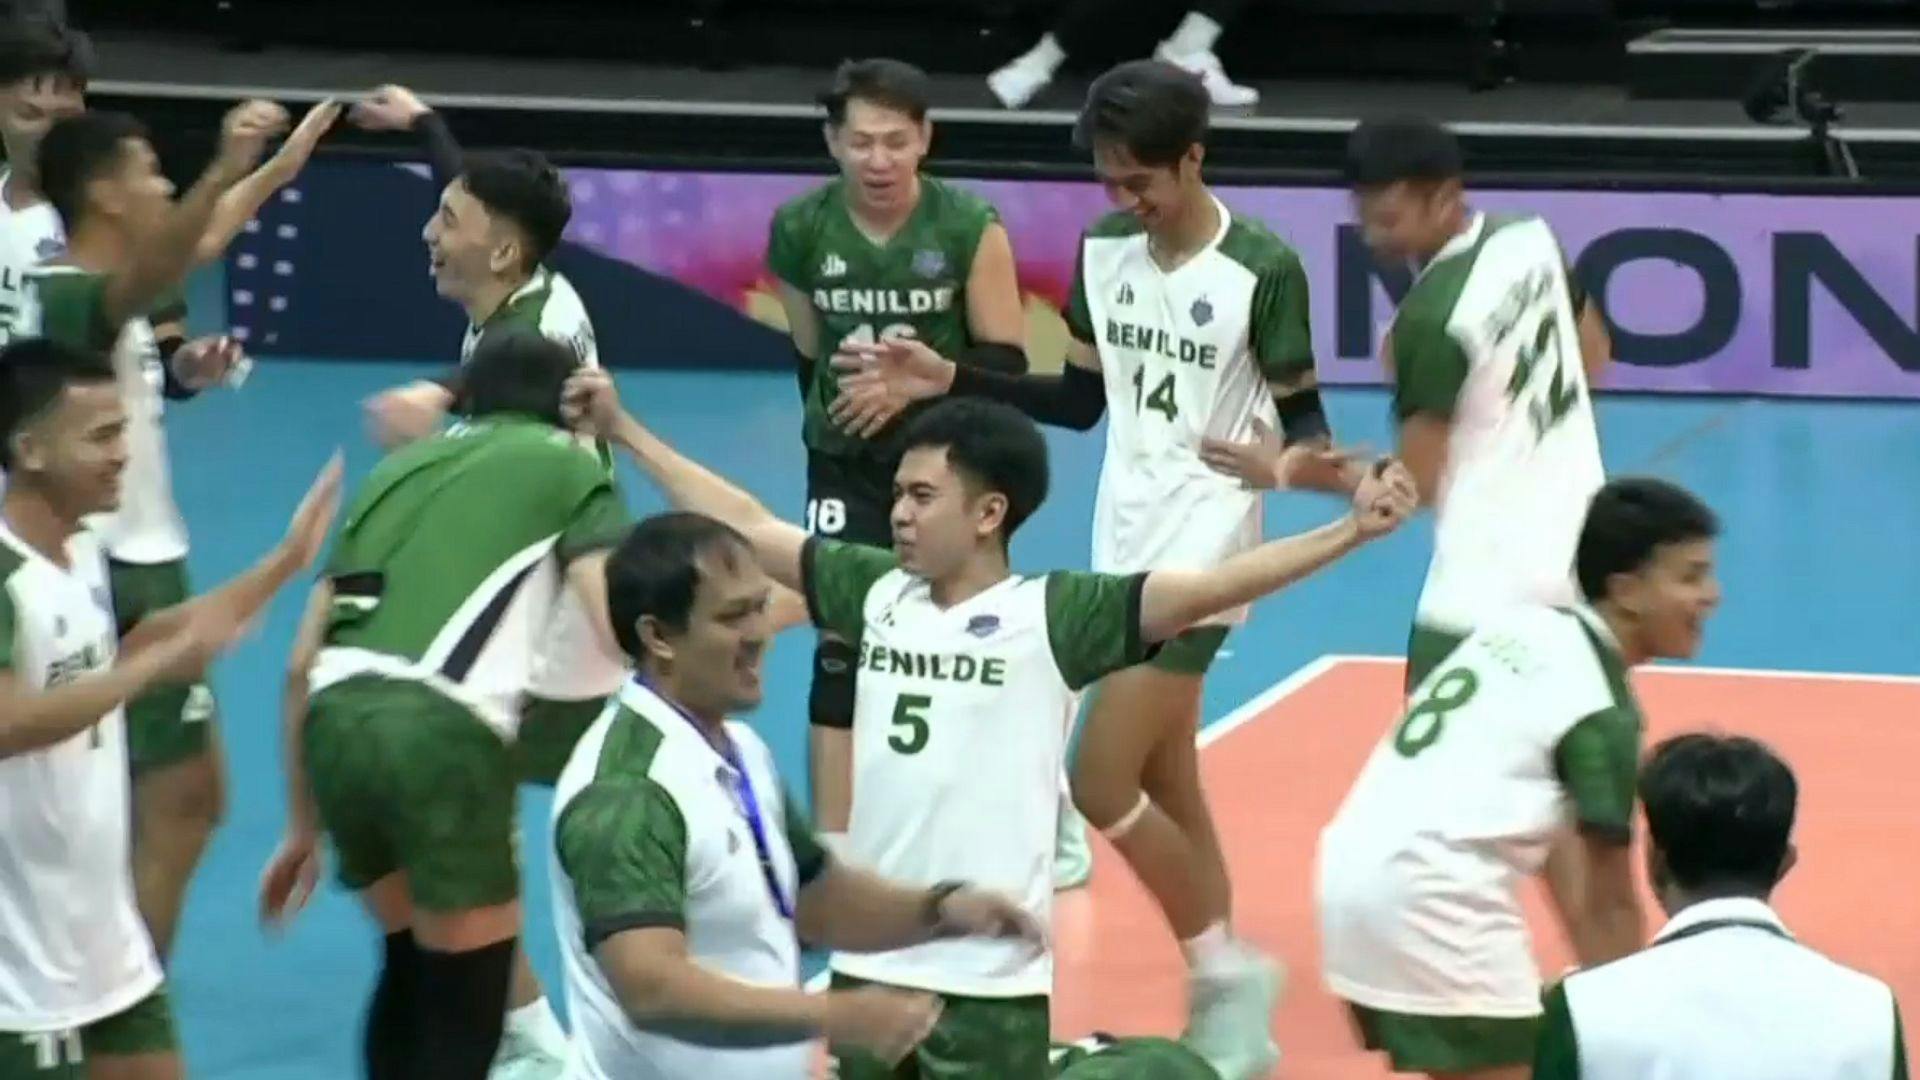 St. Benilde schools Spin Doctors for bounce back win in PNVF Champions League